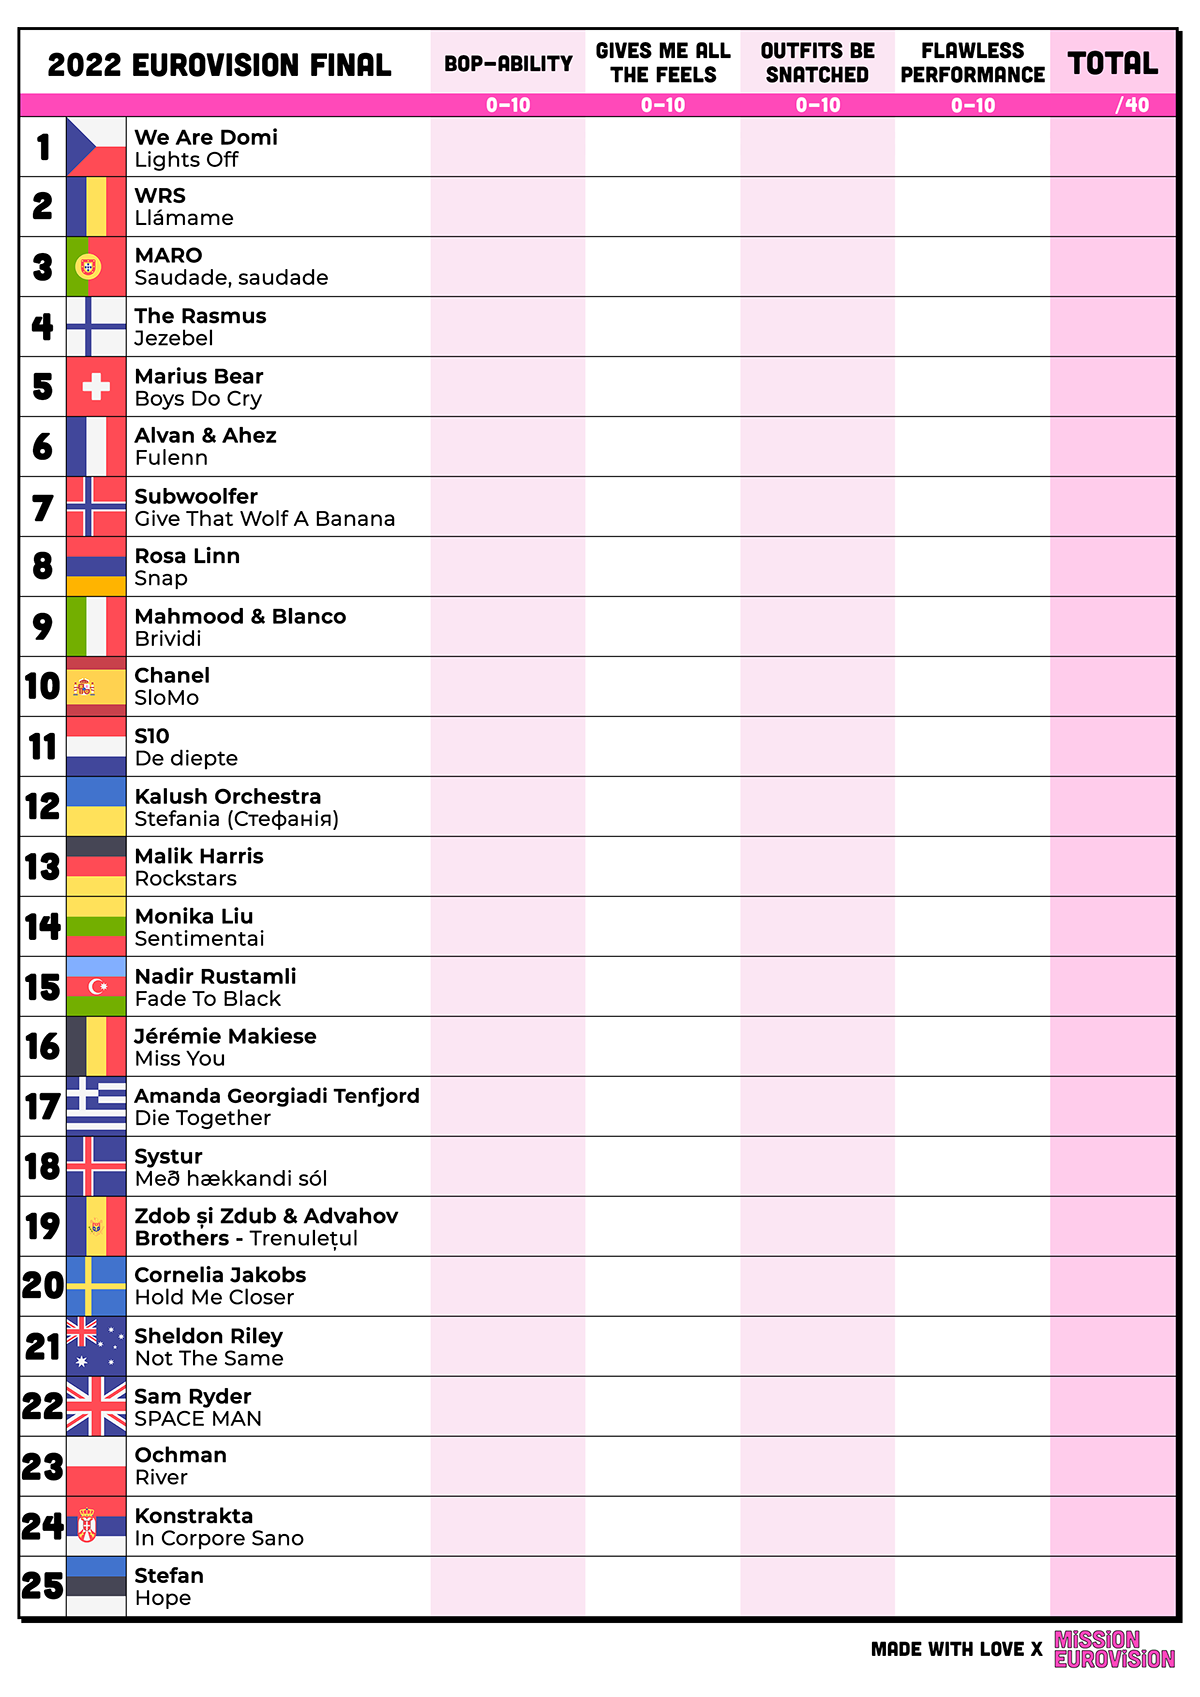 Christopher Mitchell Eurovision 2022 Score Cards